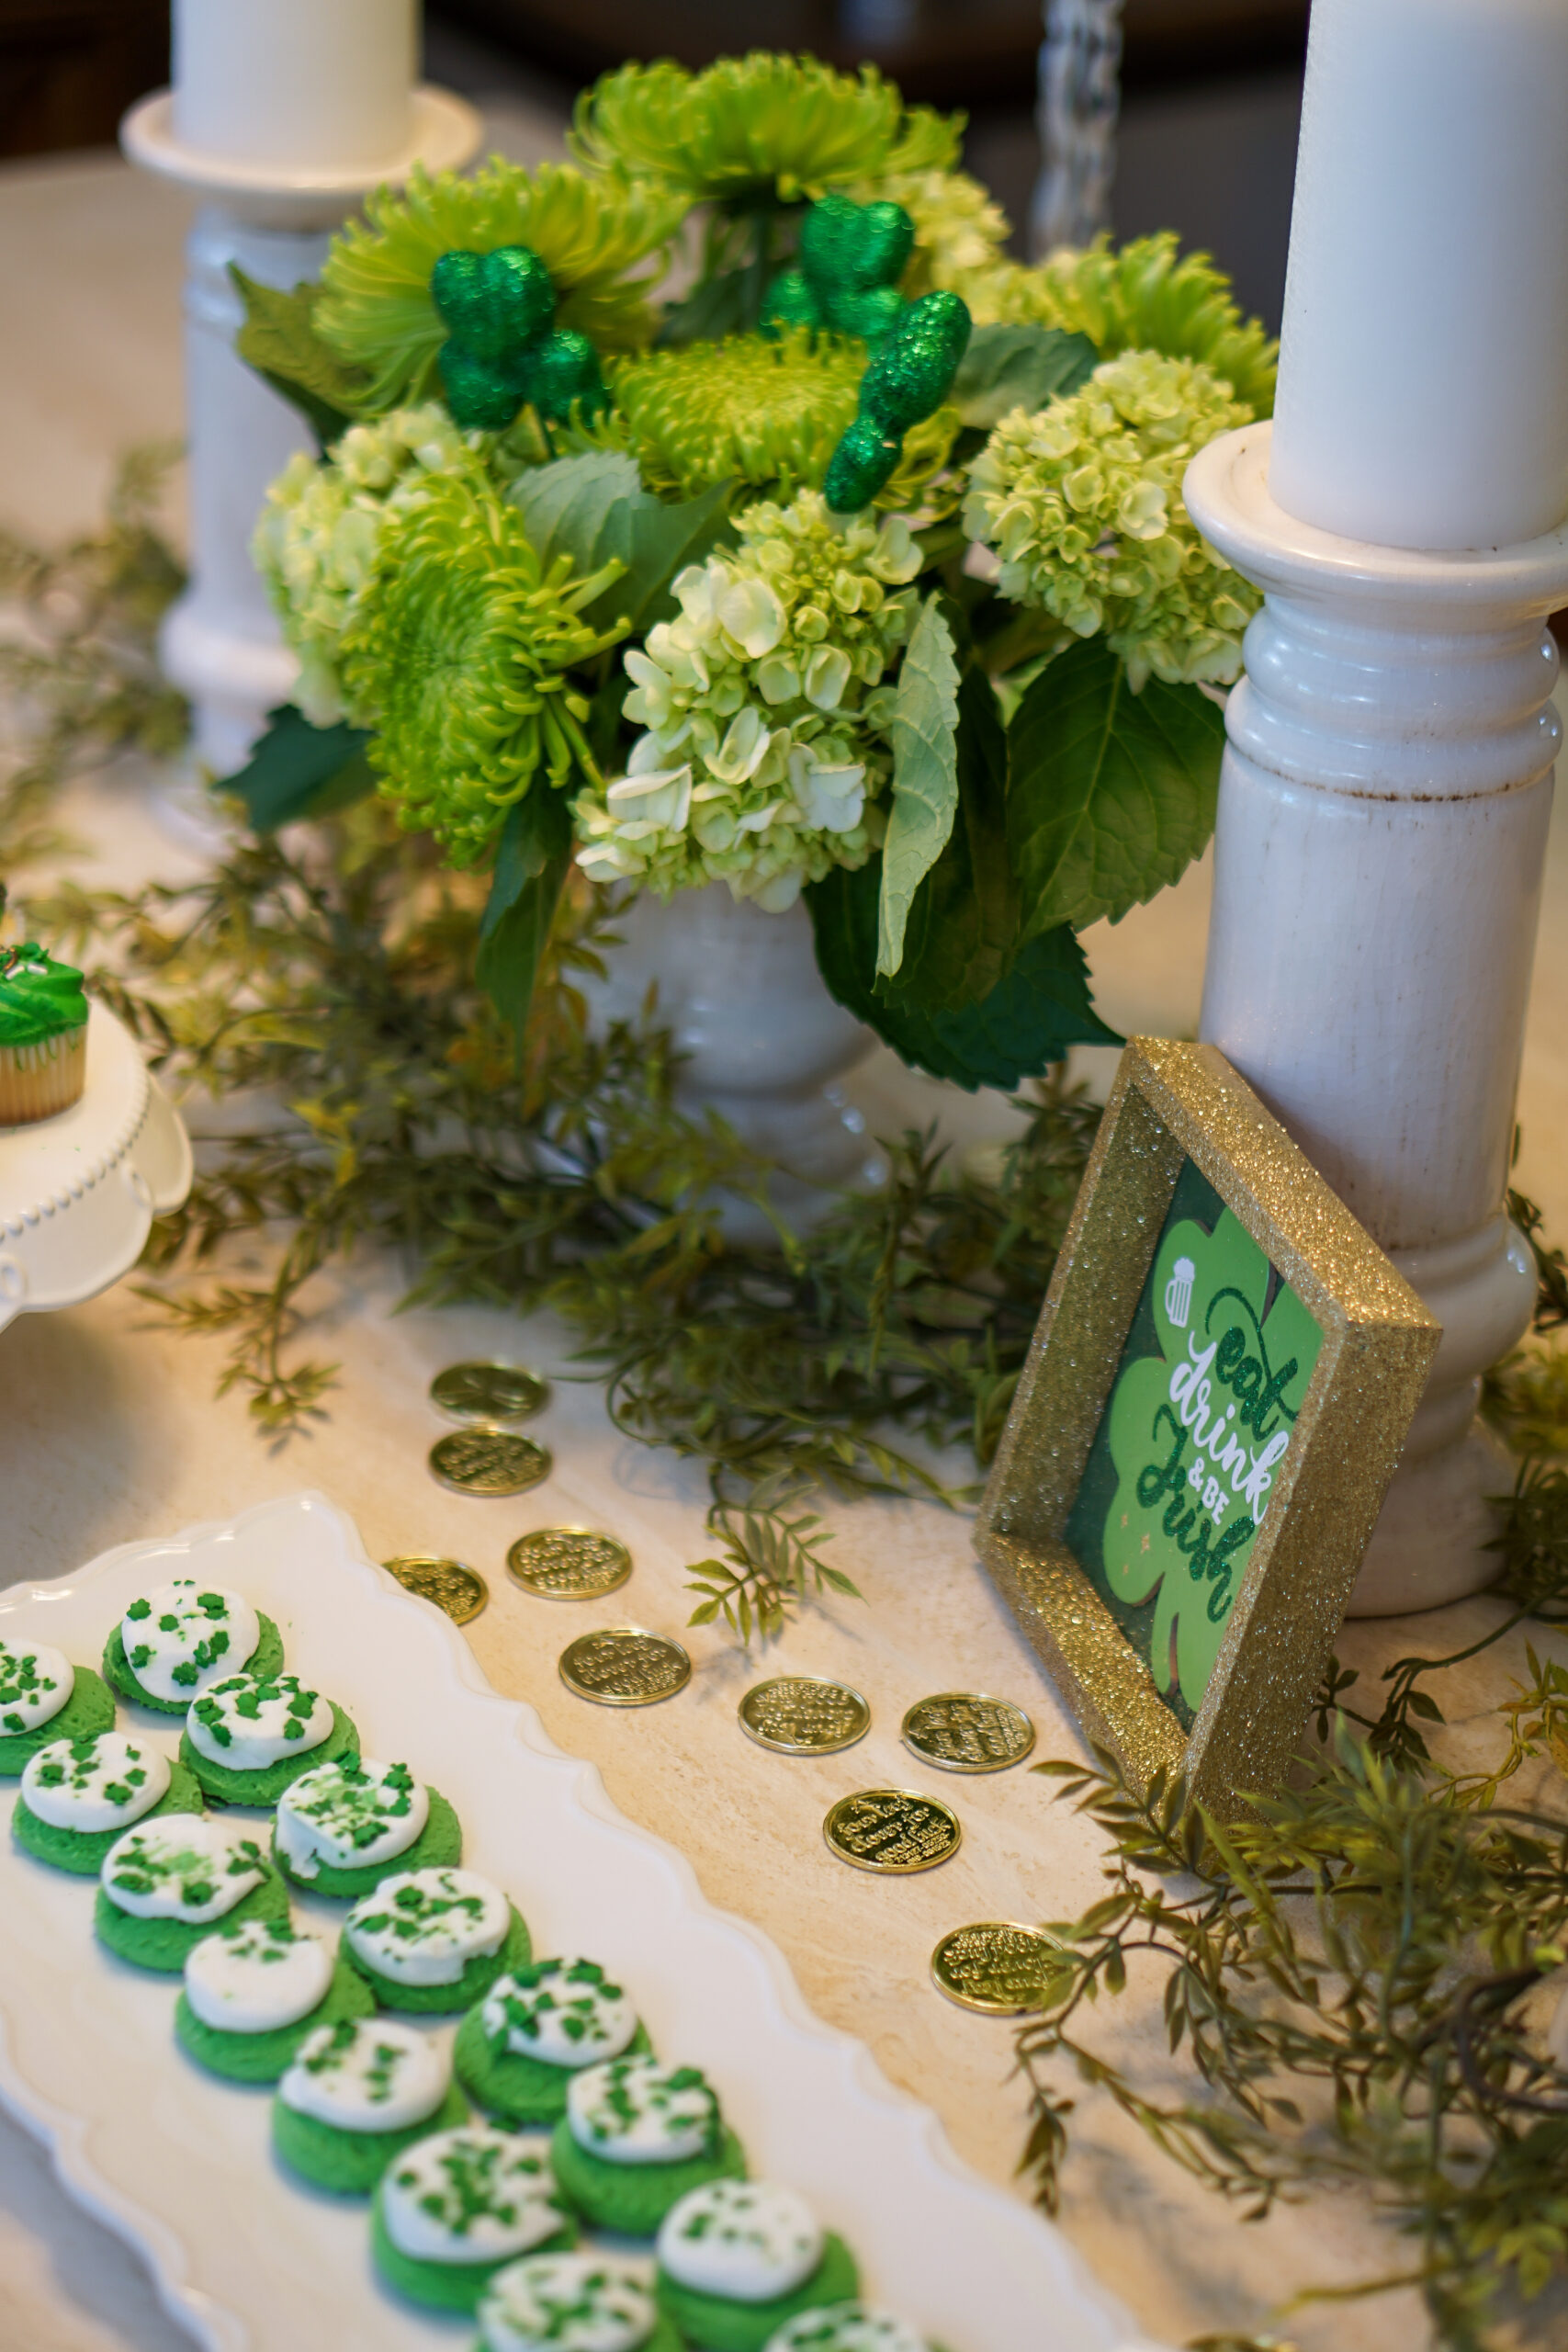 The Ultimate St. Patrick's Day Entertaining Guide